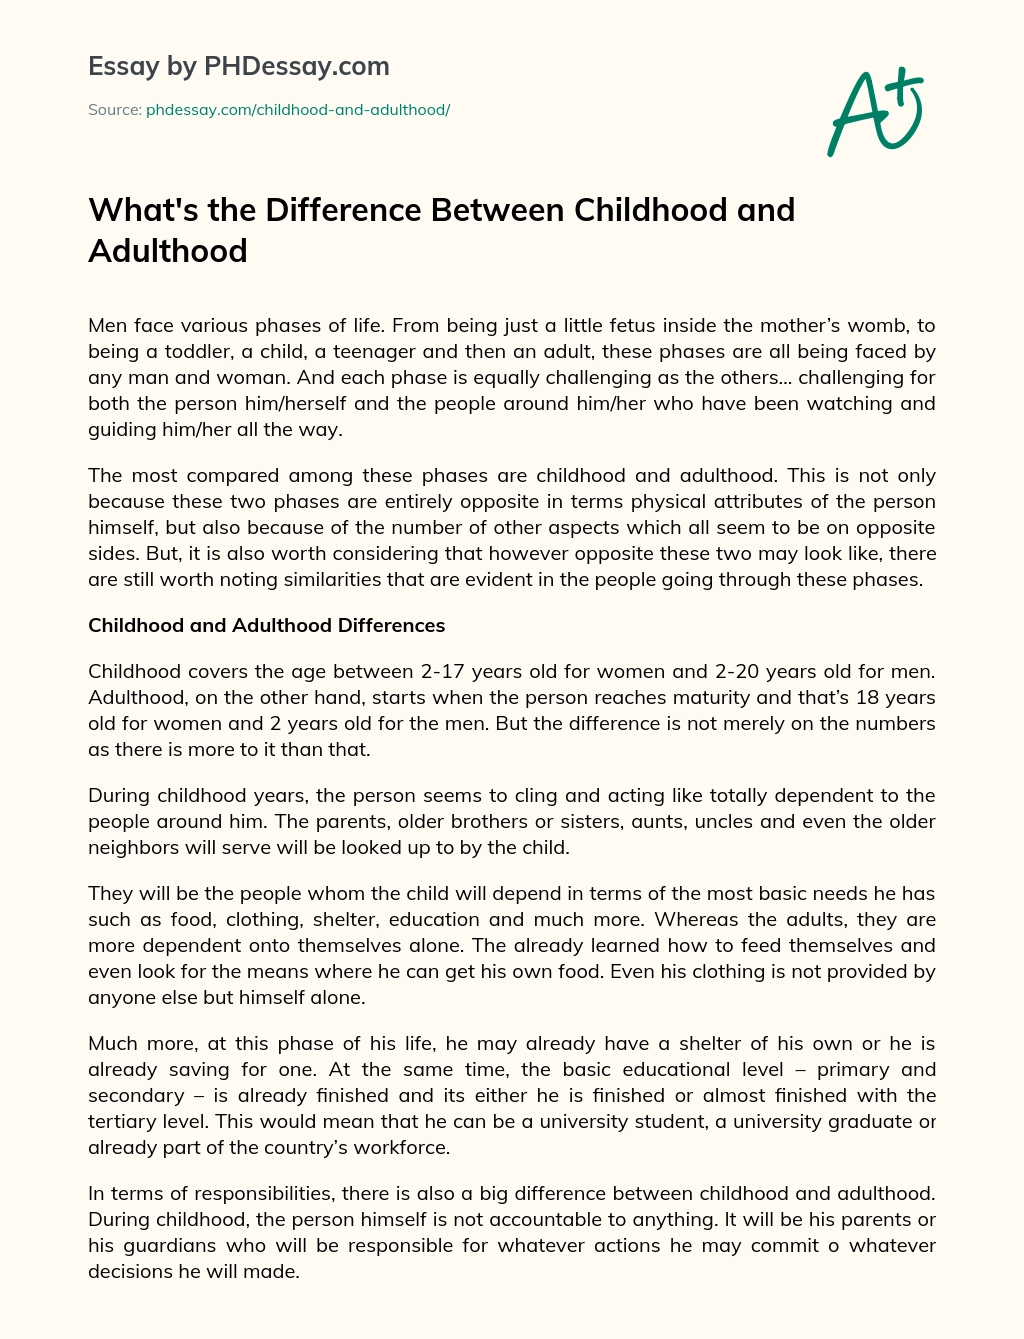 What’s the Difference Between Childhood and Adulthood essay